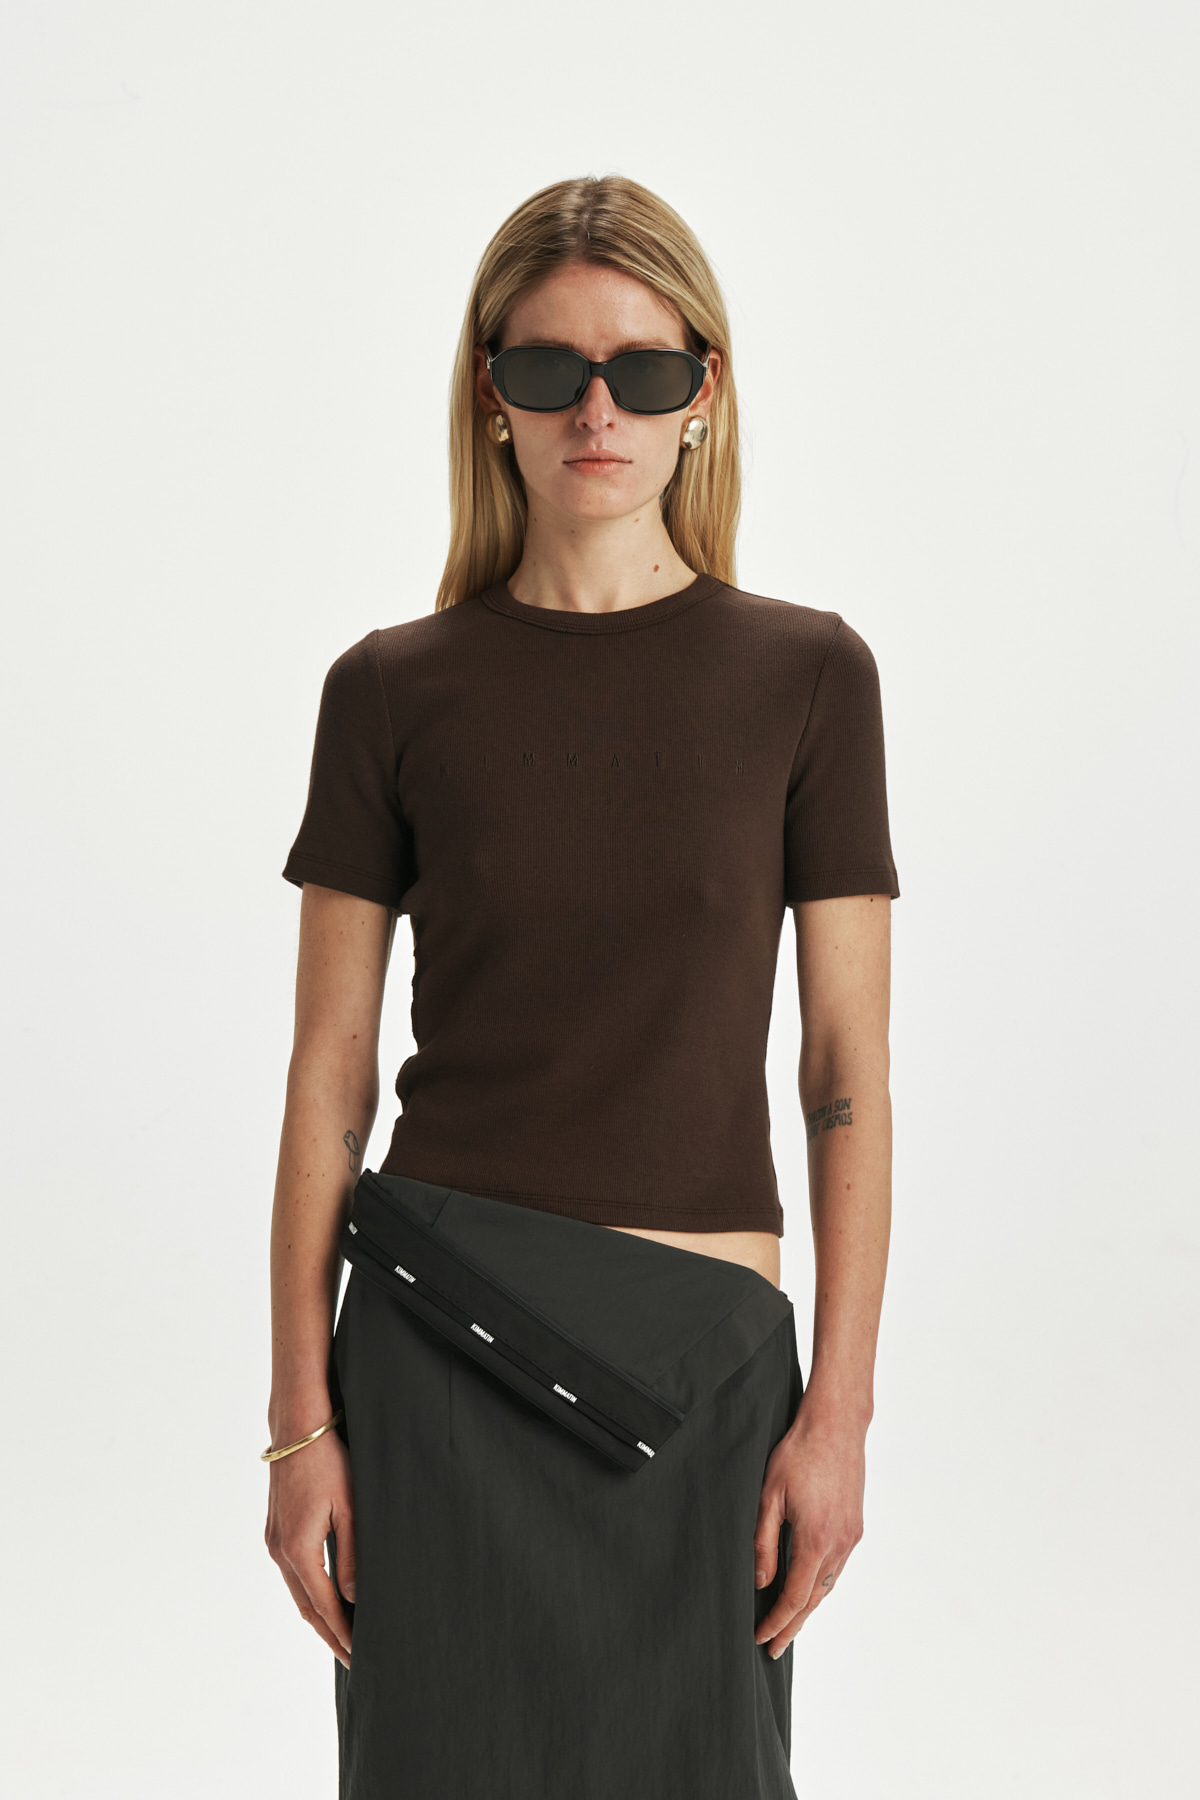 SMALL LOGO RIBBED TOP IN BROWN